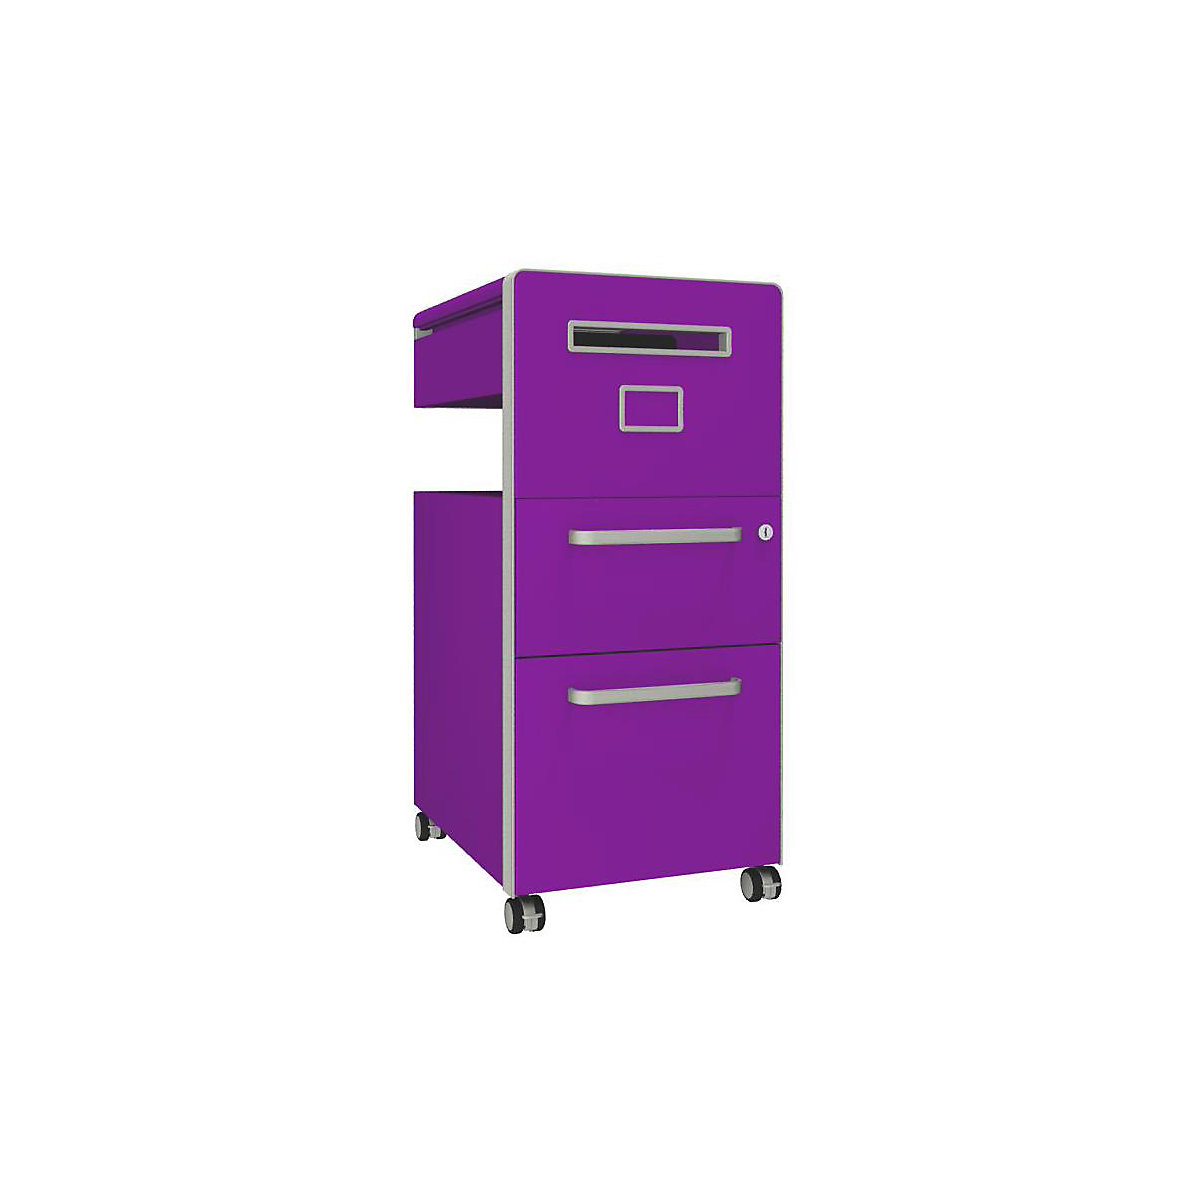 Bite™ pedestal furniture, with 1 whiteboard, opens on the right side – BISLEY, with 1 universal drawer, 1 suspension file drawer, fuchsia-16